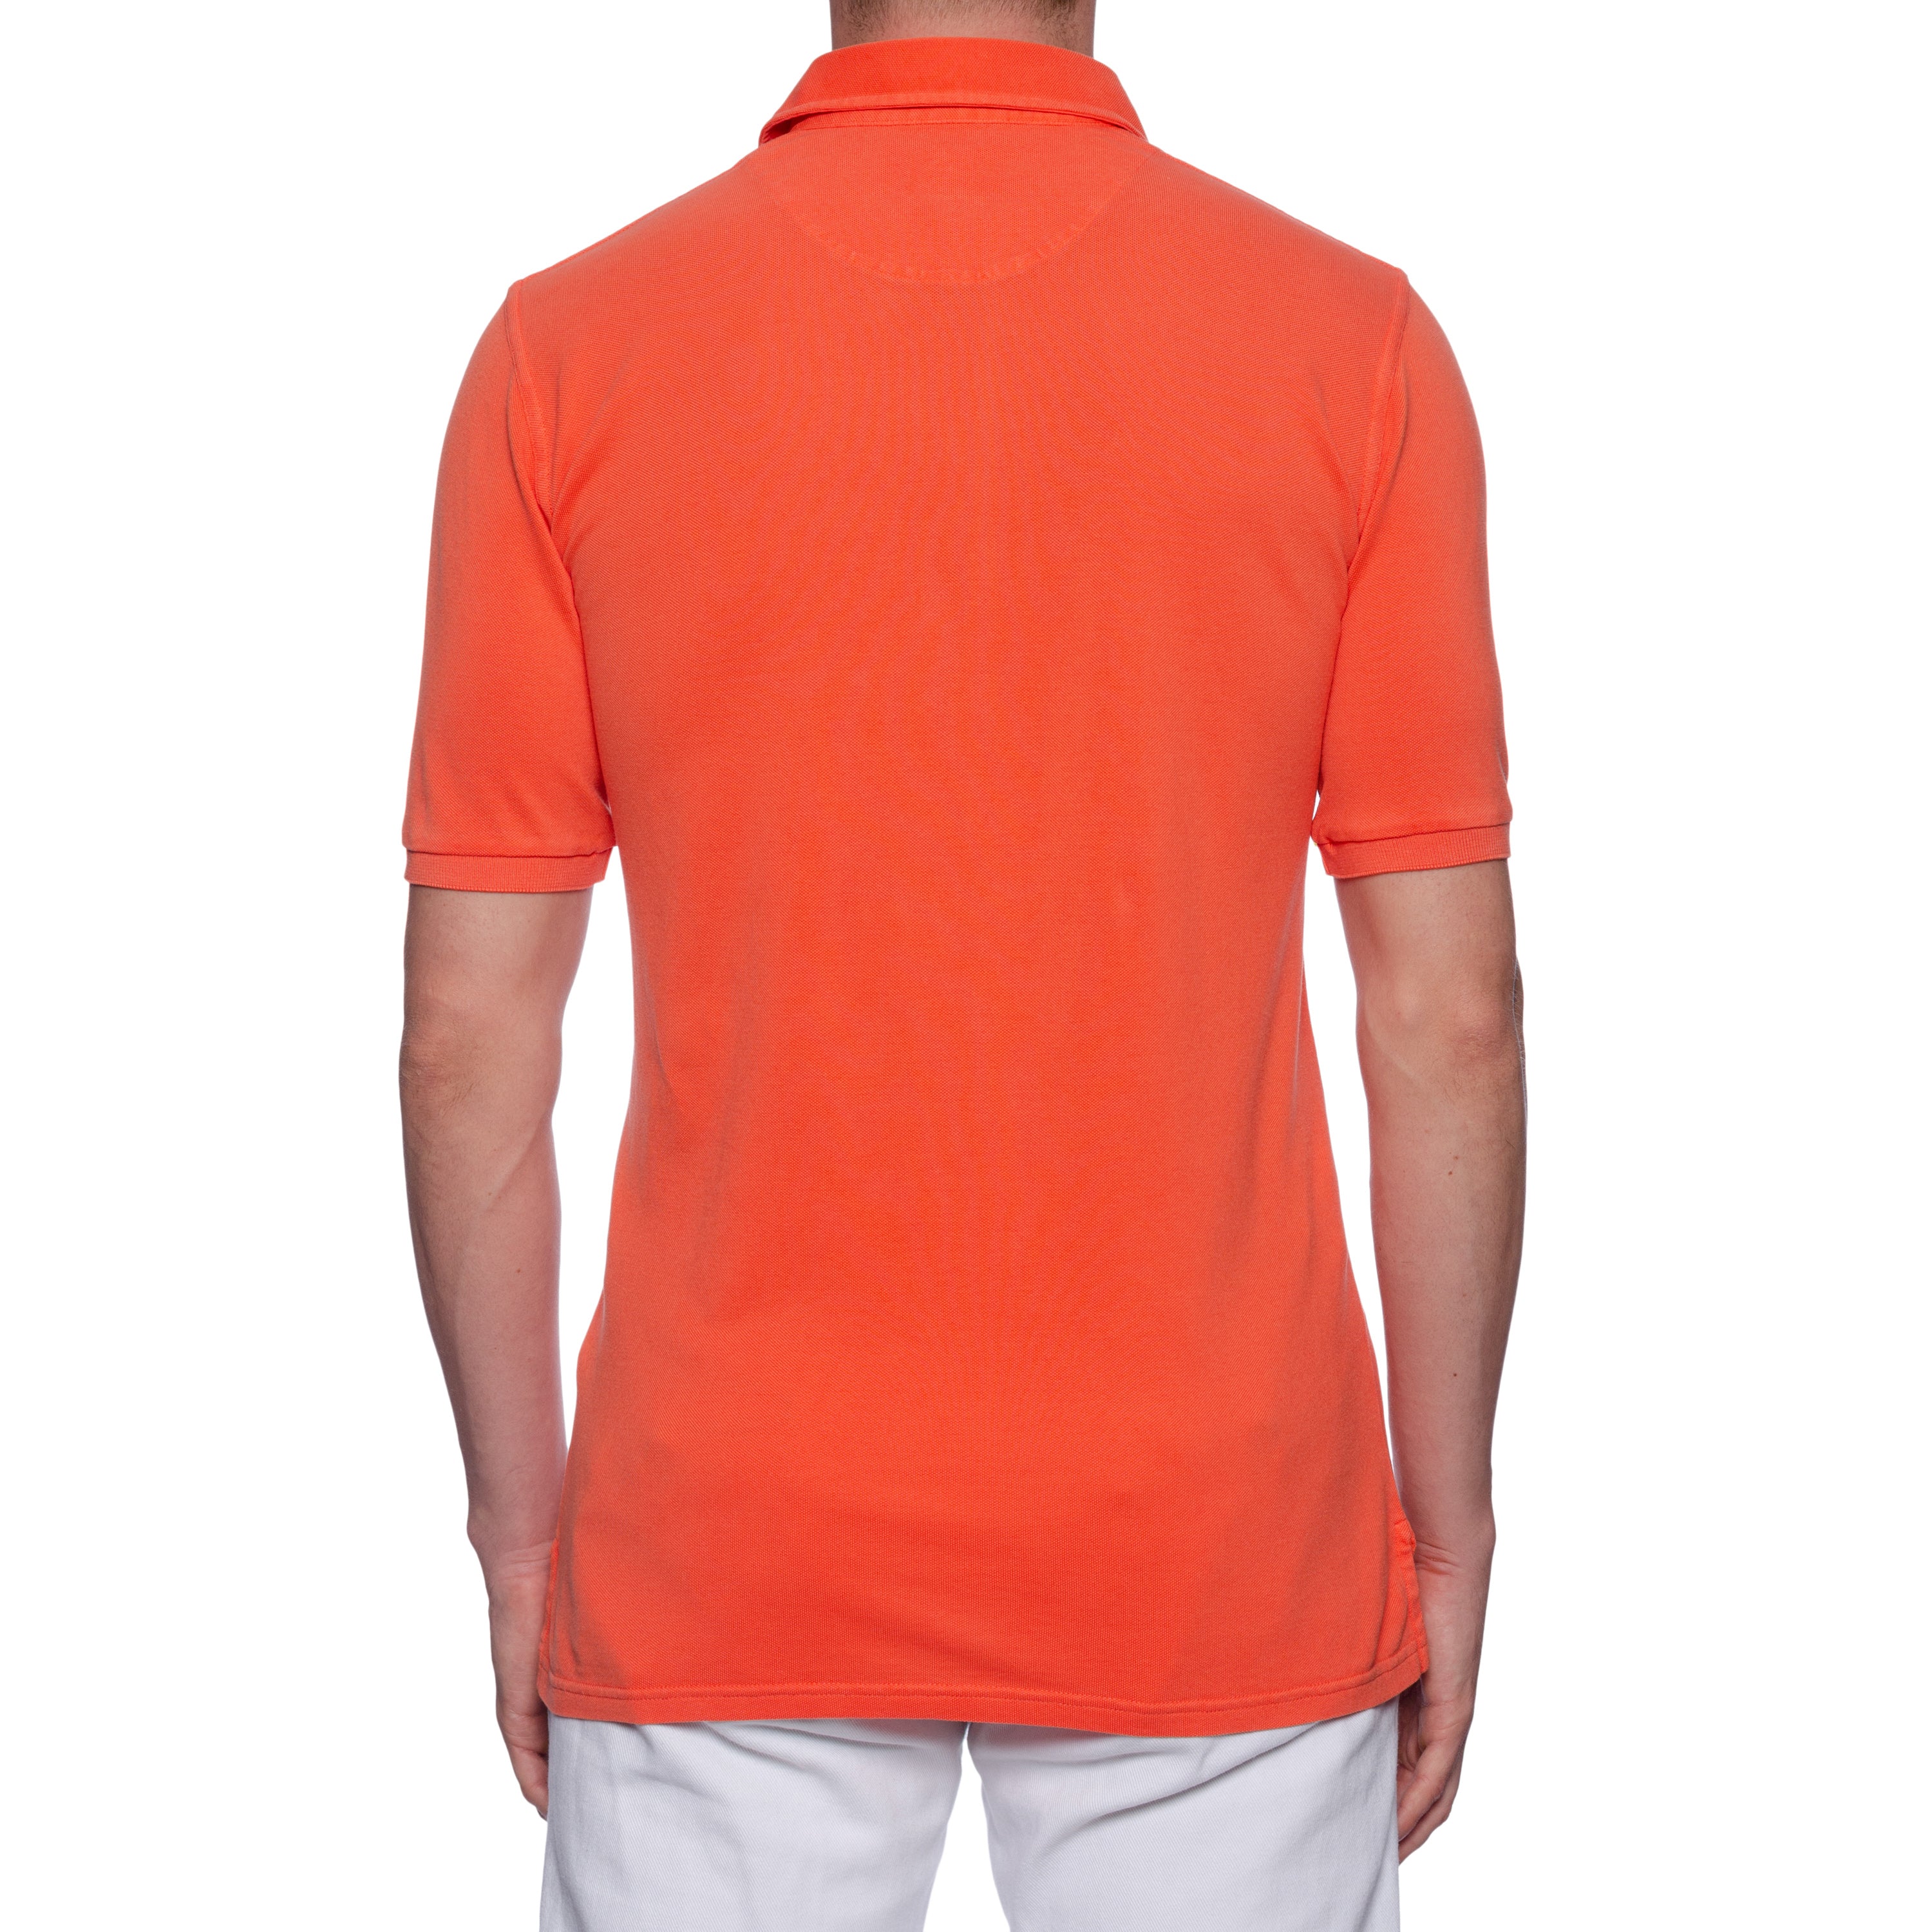 FEDELI "North" Coral Cotton Pique Frosted Short Sleeve Polo Shirt EU 50 NEW US M FEDELI